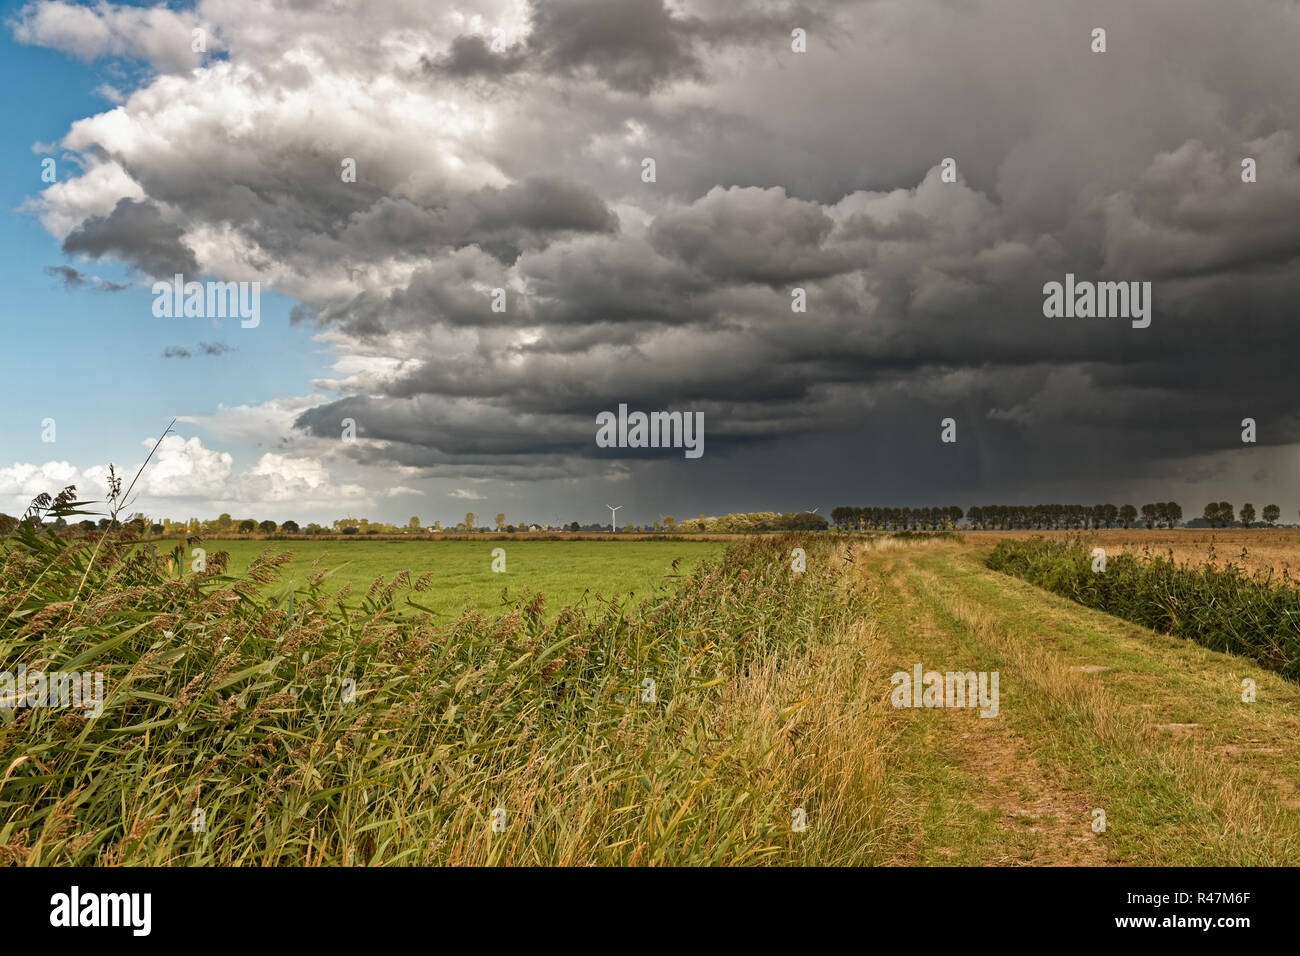 severe weather in september Stock Photo